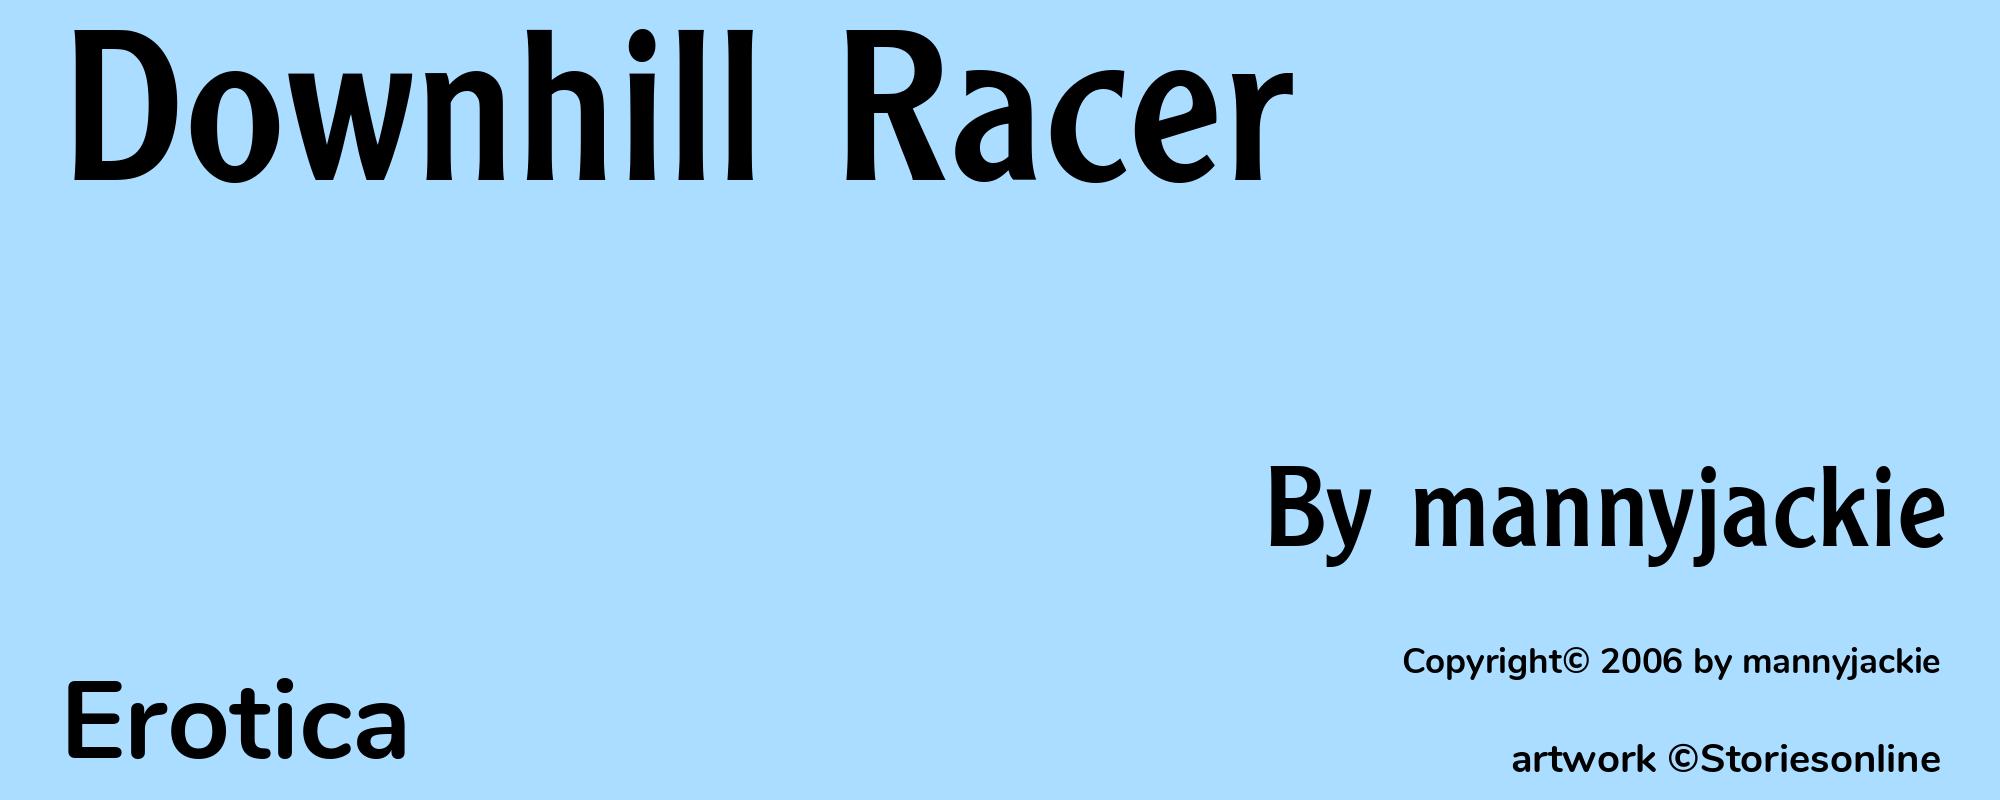 Downhill Racer - Cover